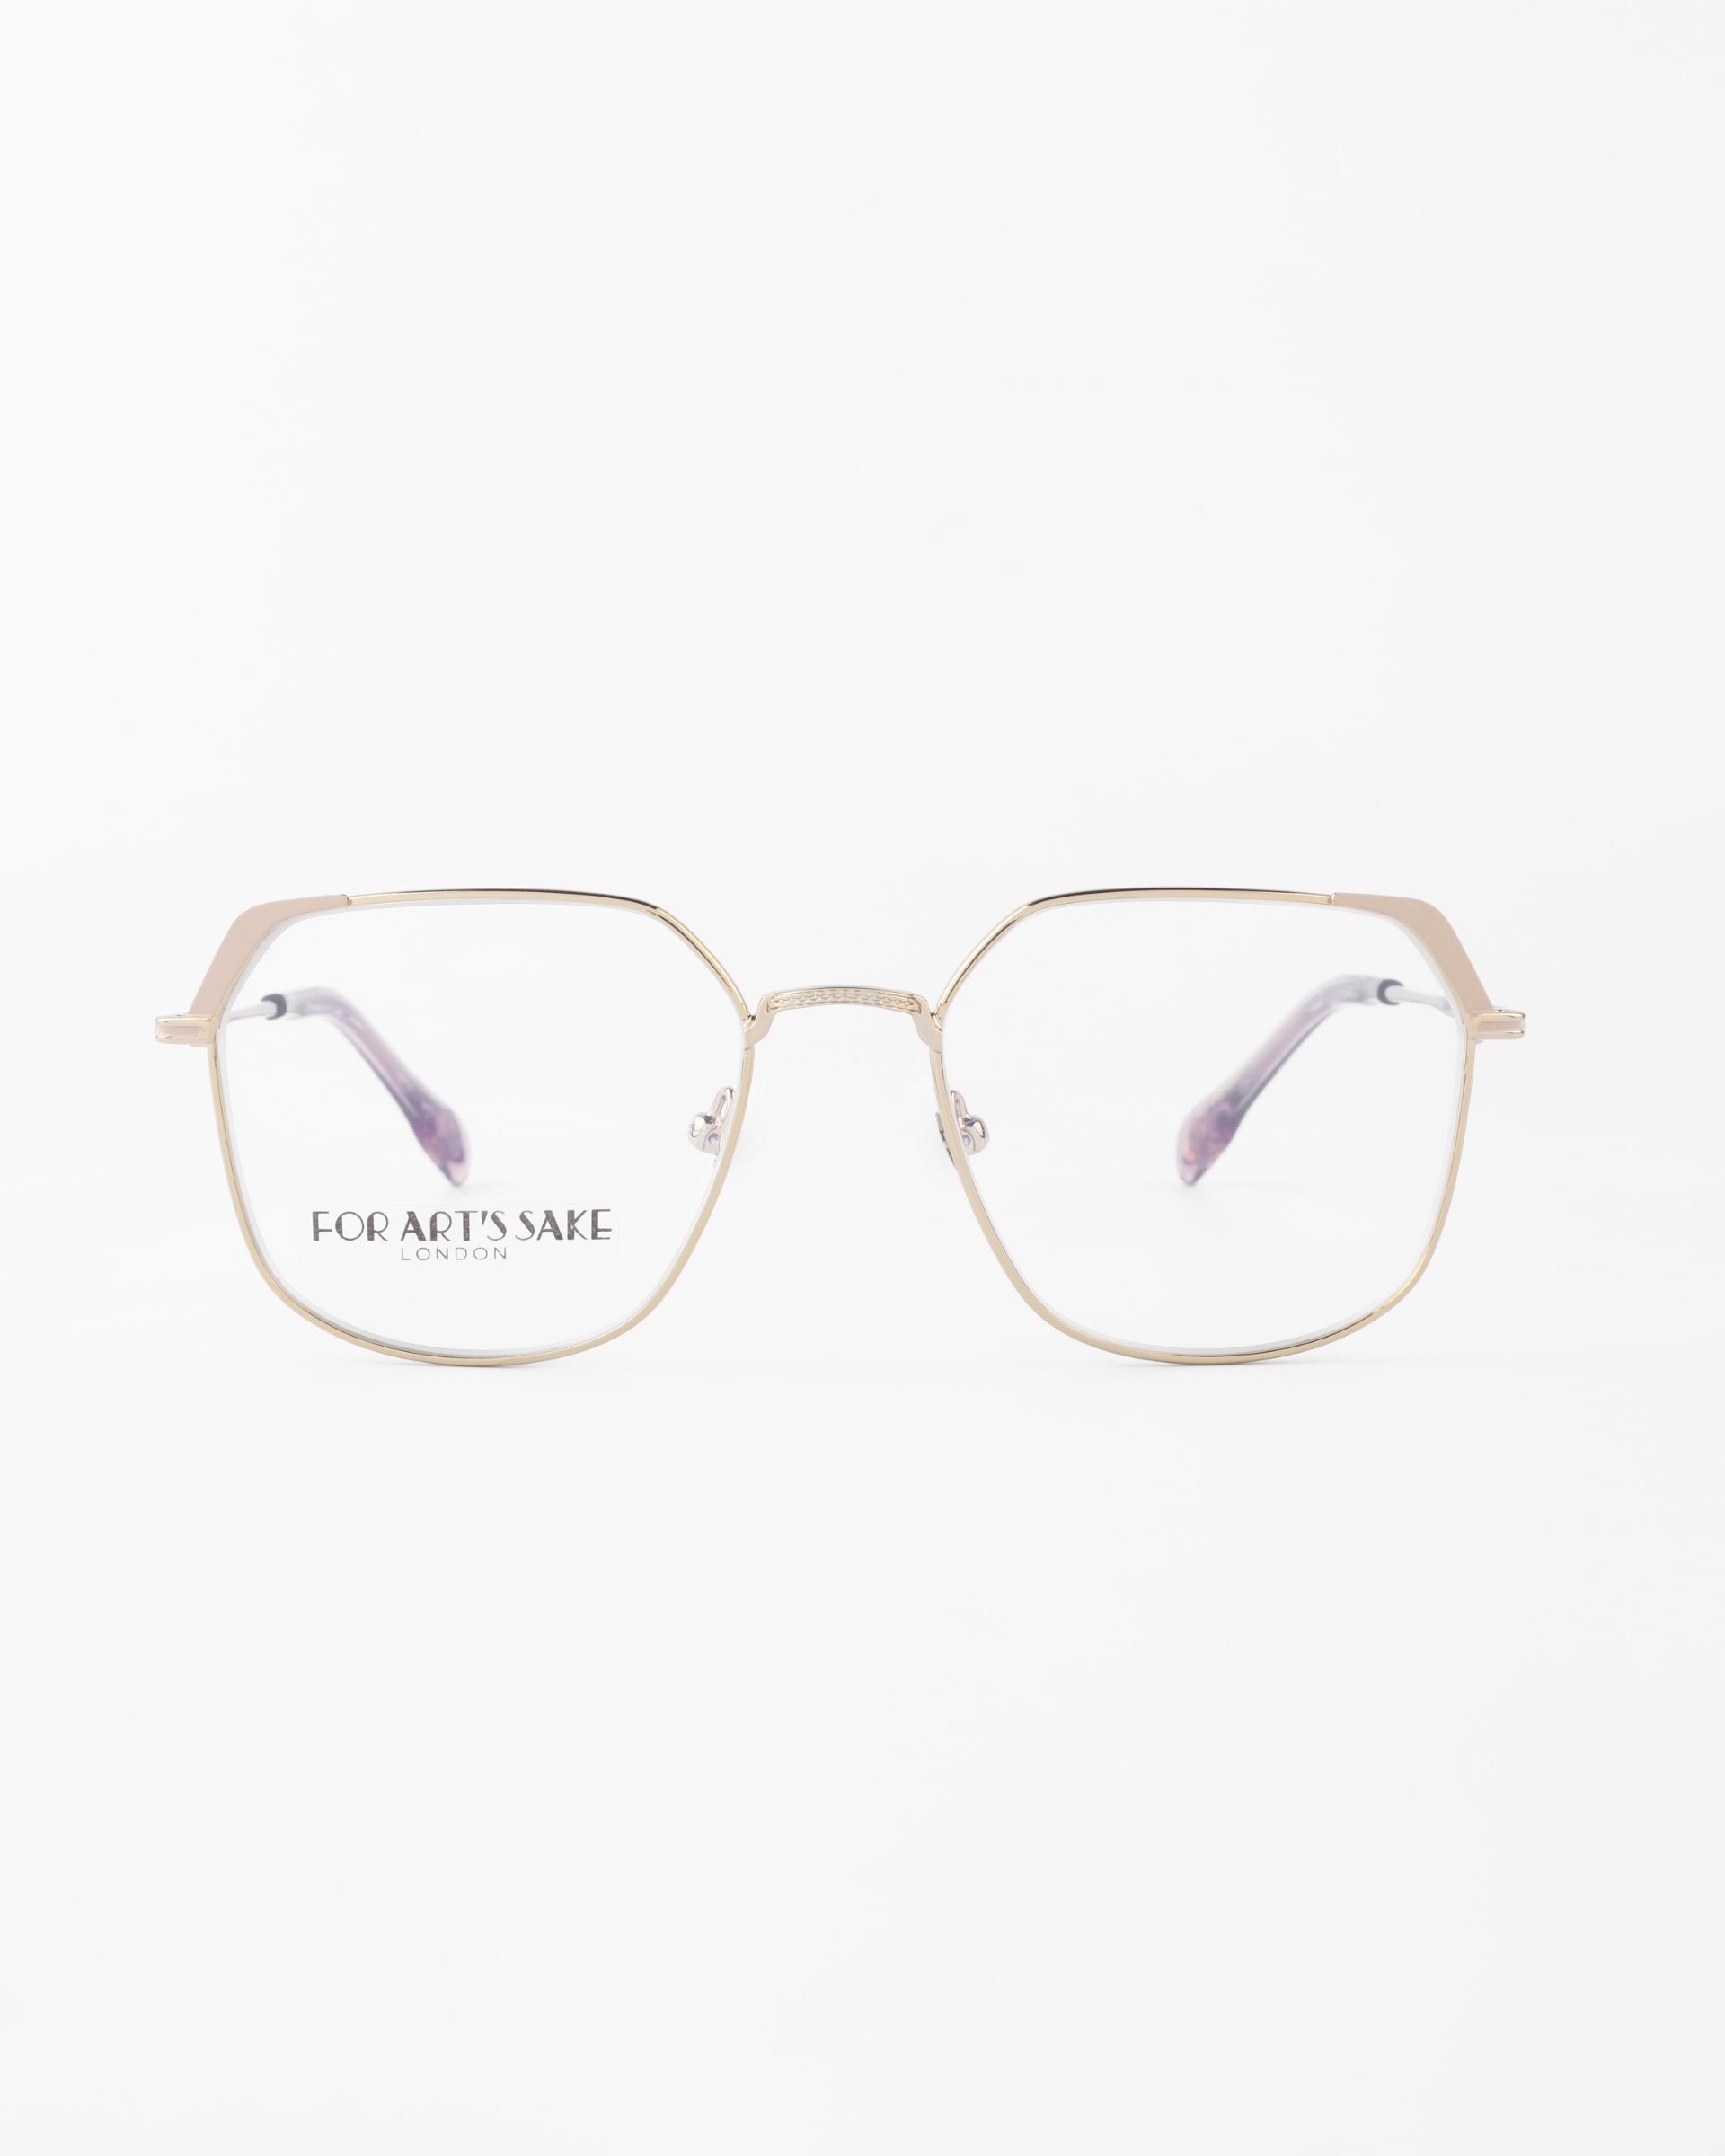 Close-up of gold-framed eyeglasses with hexagonal-shaped lenses and clear nose pads. The arms curve gracefully and feature a pale pink gradient. &quot;For Art&#39;s Sake®&quot; is printed on the left lens, offering both style and blue light filter for optimum eye comfort. The background is white.